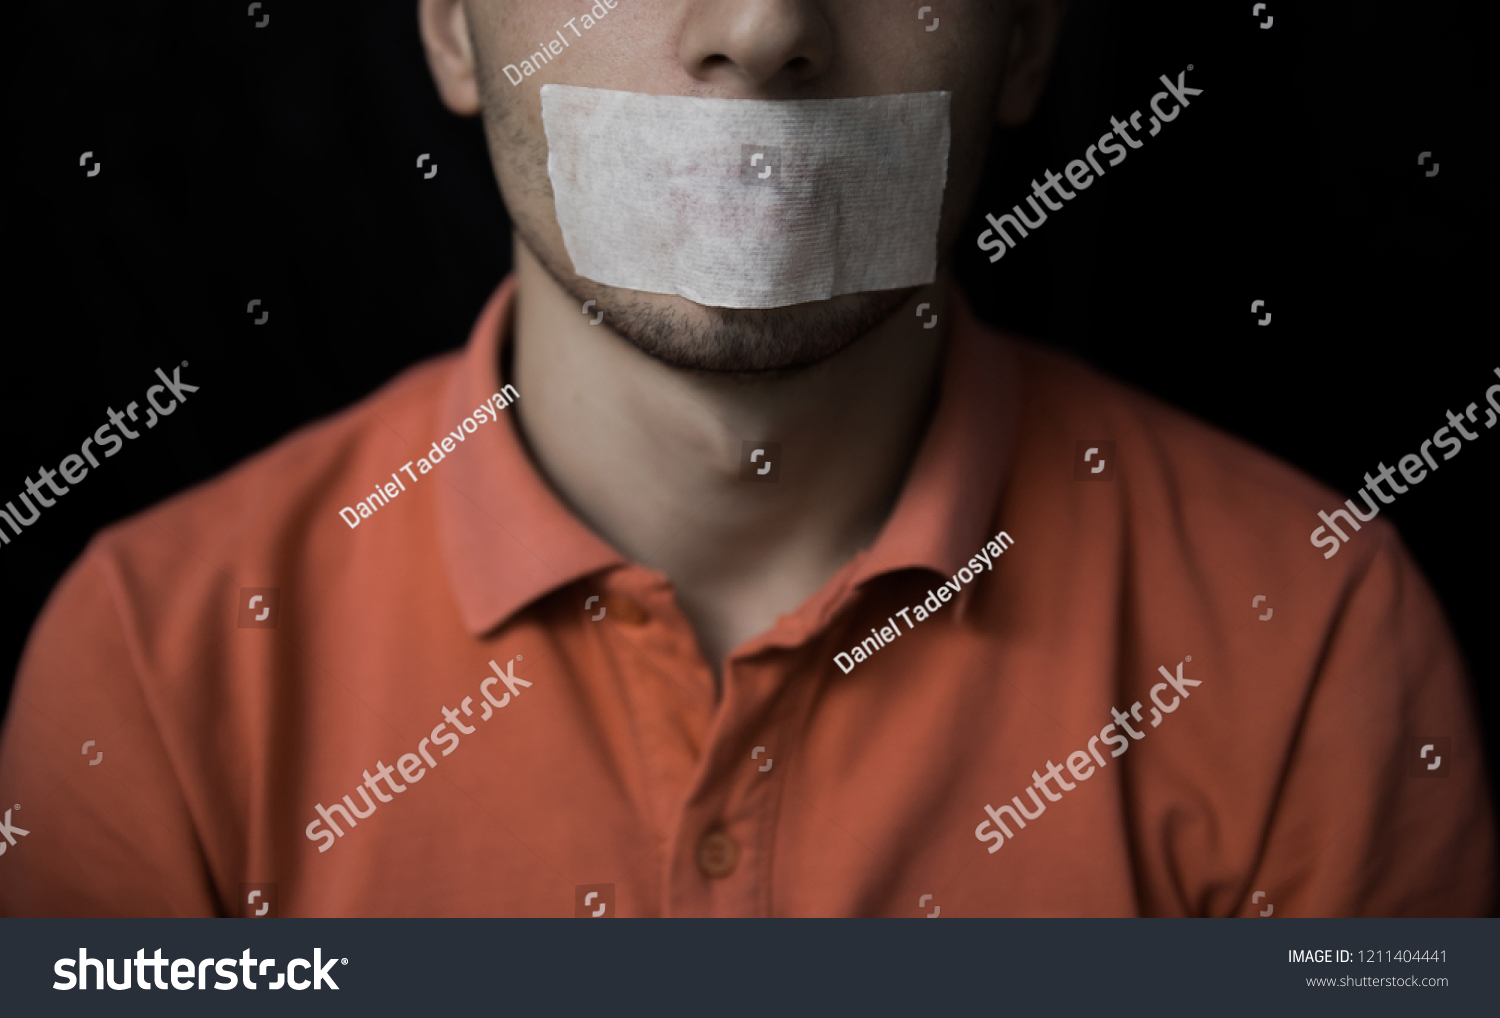 Man is silenced with adhesive tape on his mouth. #1211404441